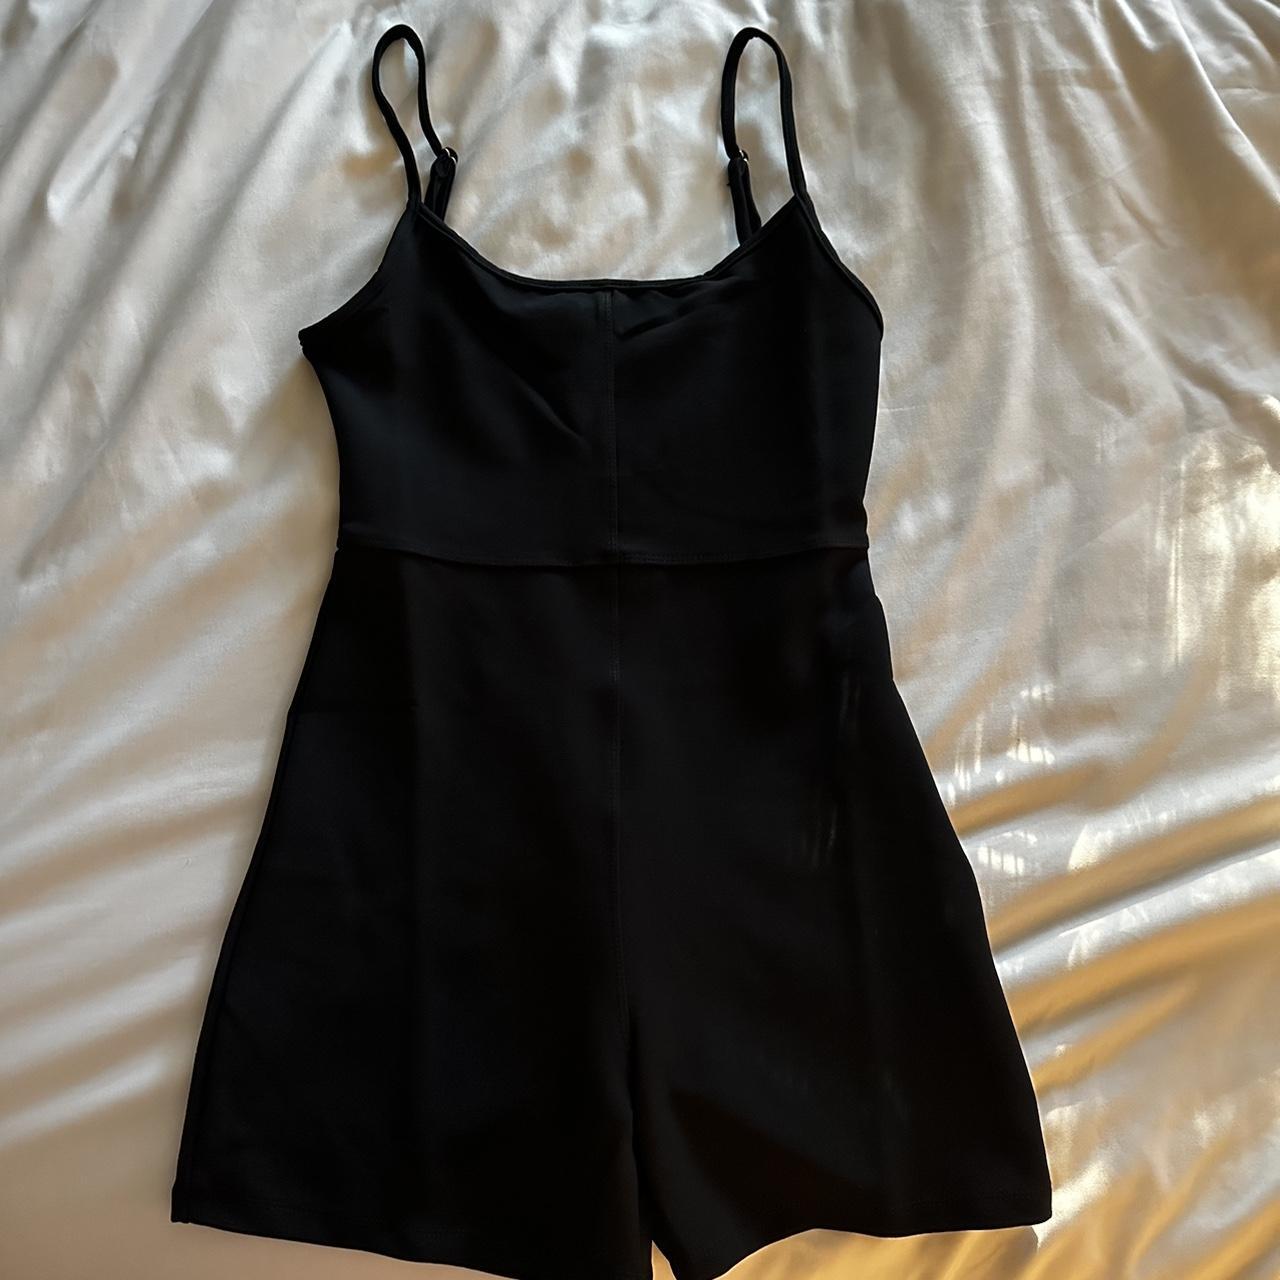 White Fox black jumpsuit, new with tags - Depop